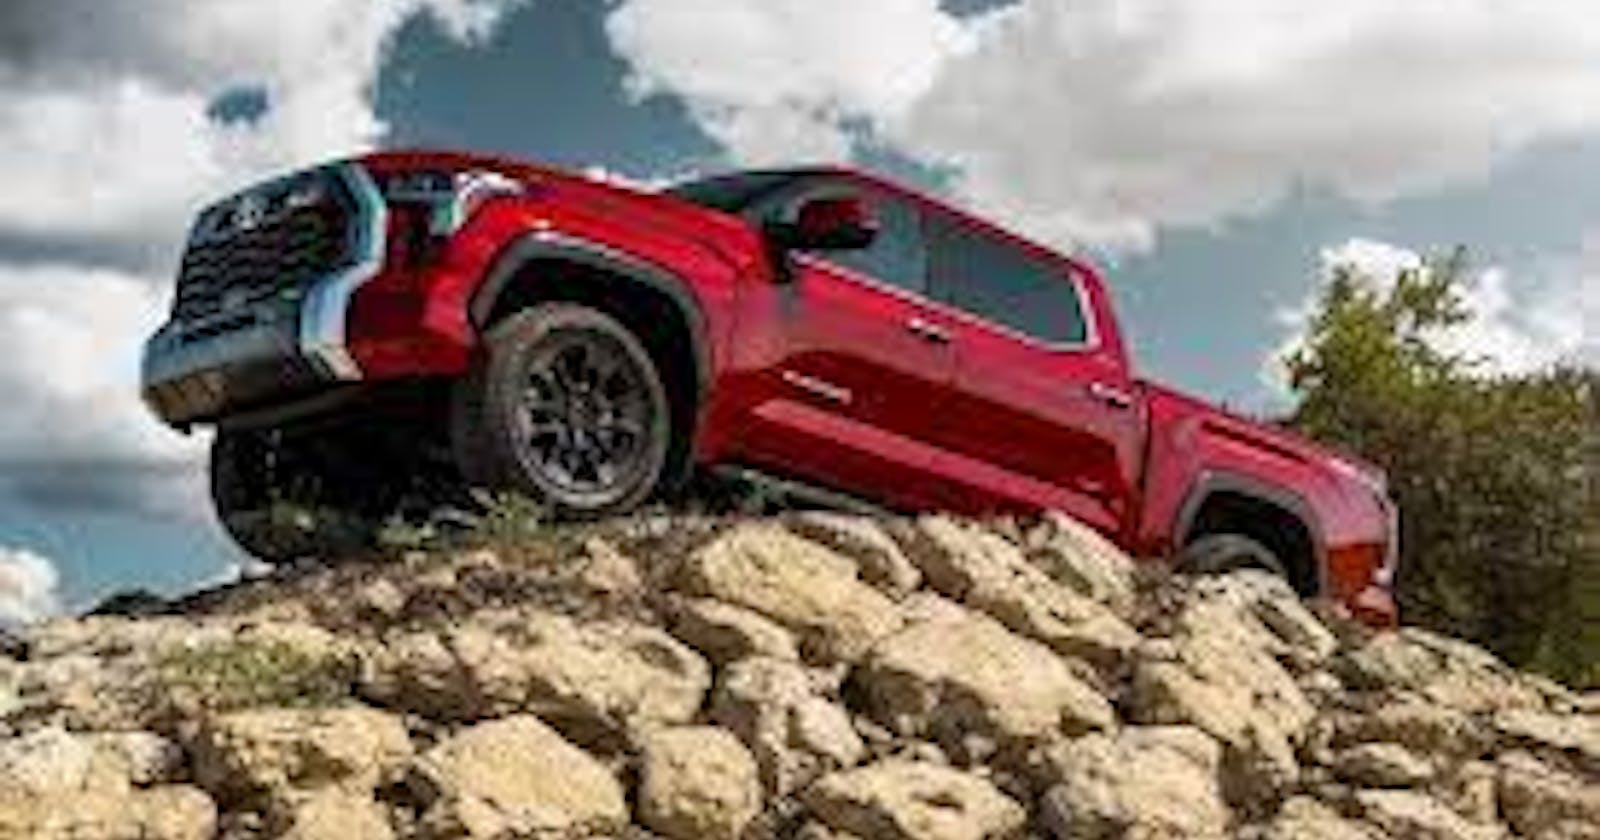 How much does a toyota tundra weigh?